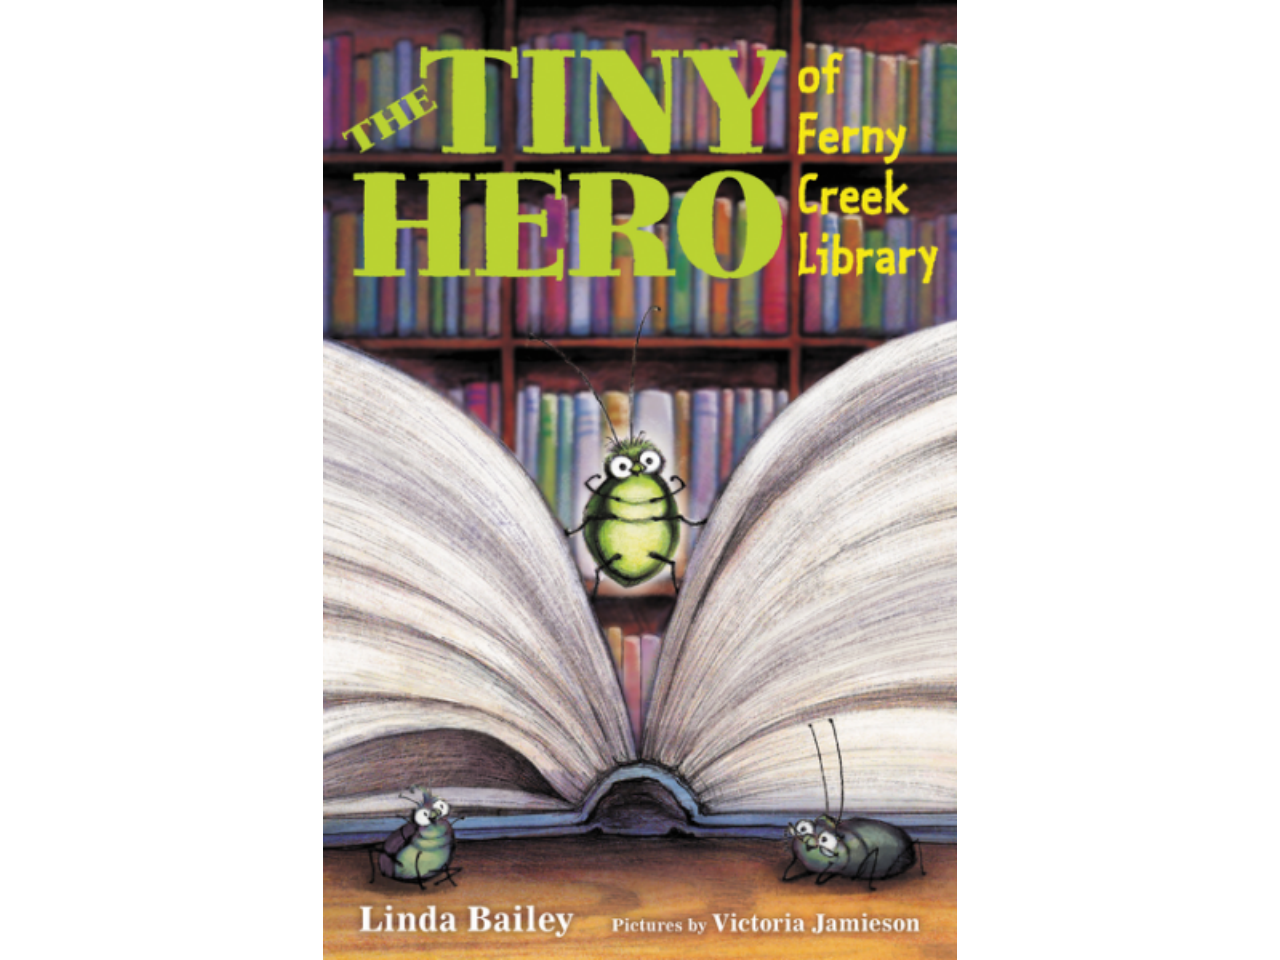 Book cover of The Tiny Hero of Ferny Creek Library depicting a tiny bug between the pages of a large book in a library